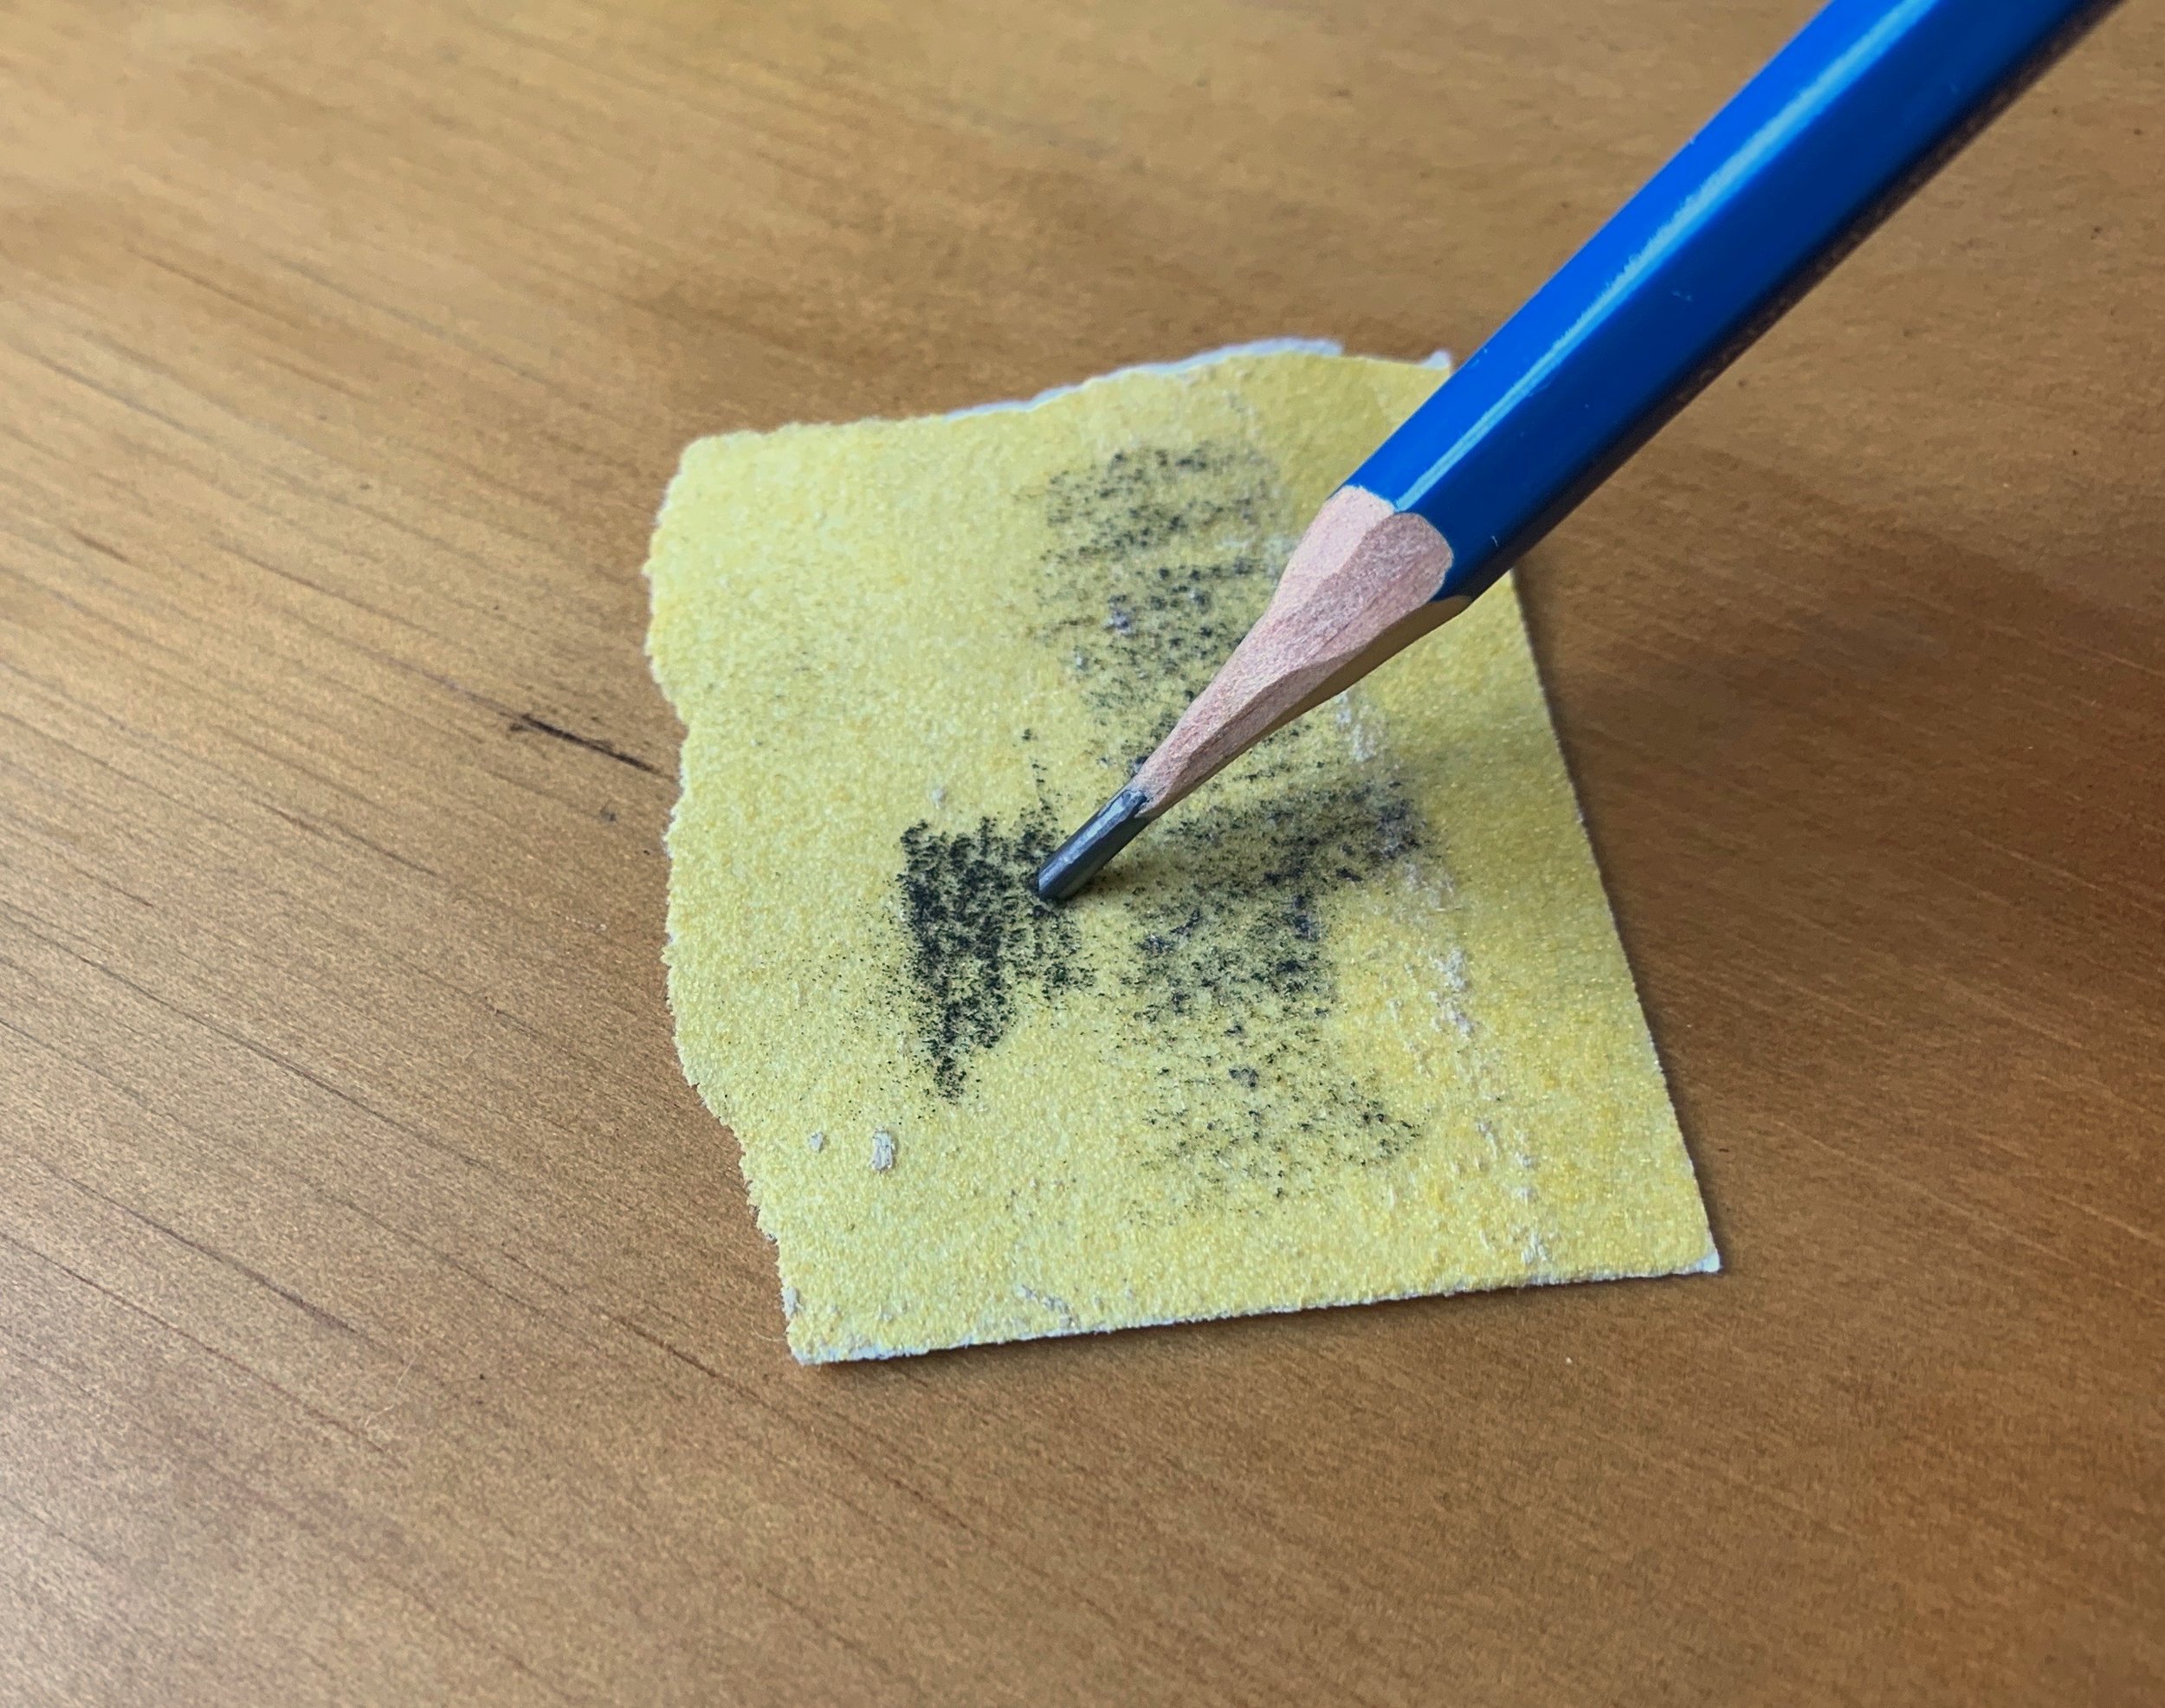 The lead of the pencil is filed on sandpaper to form a flat wedge